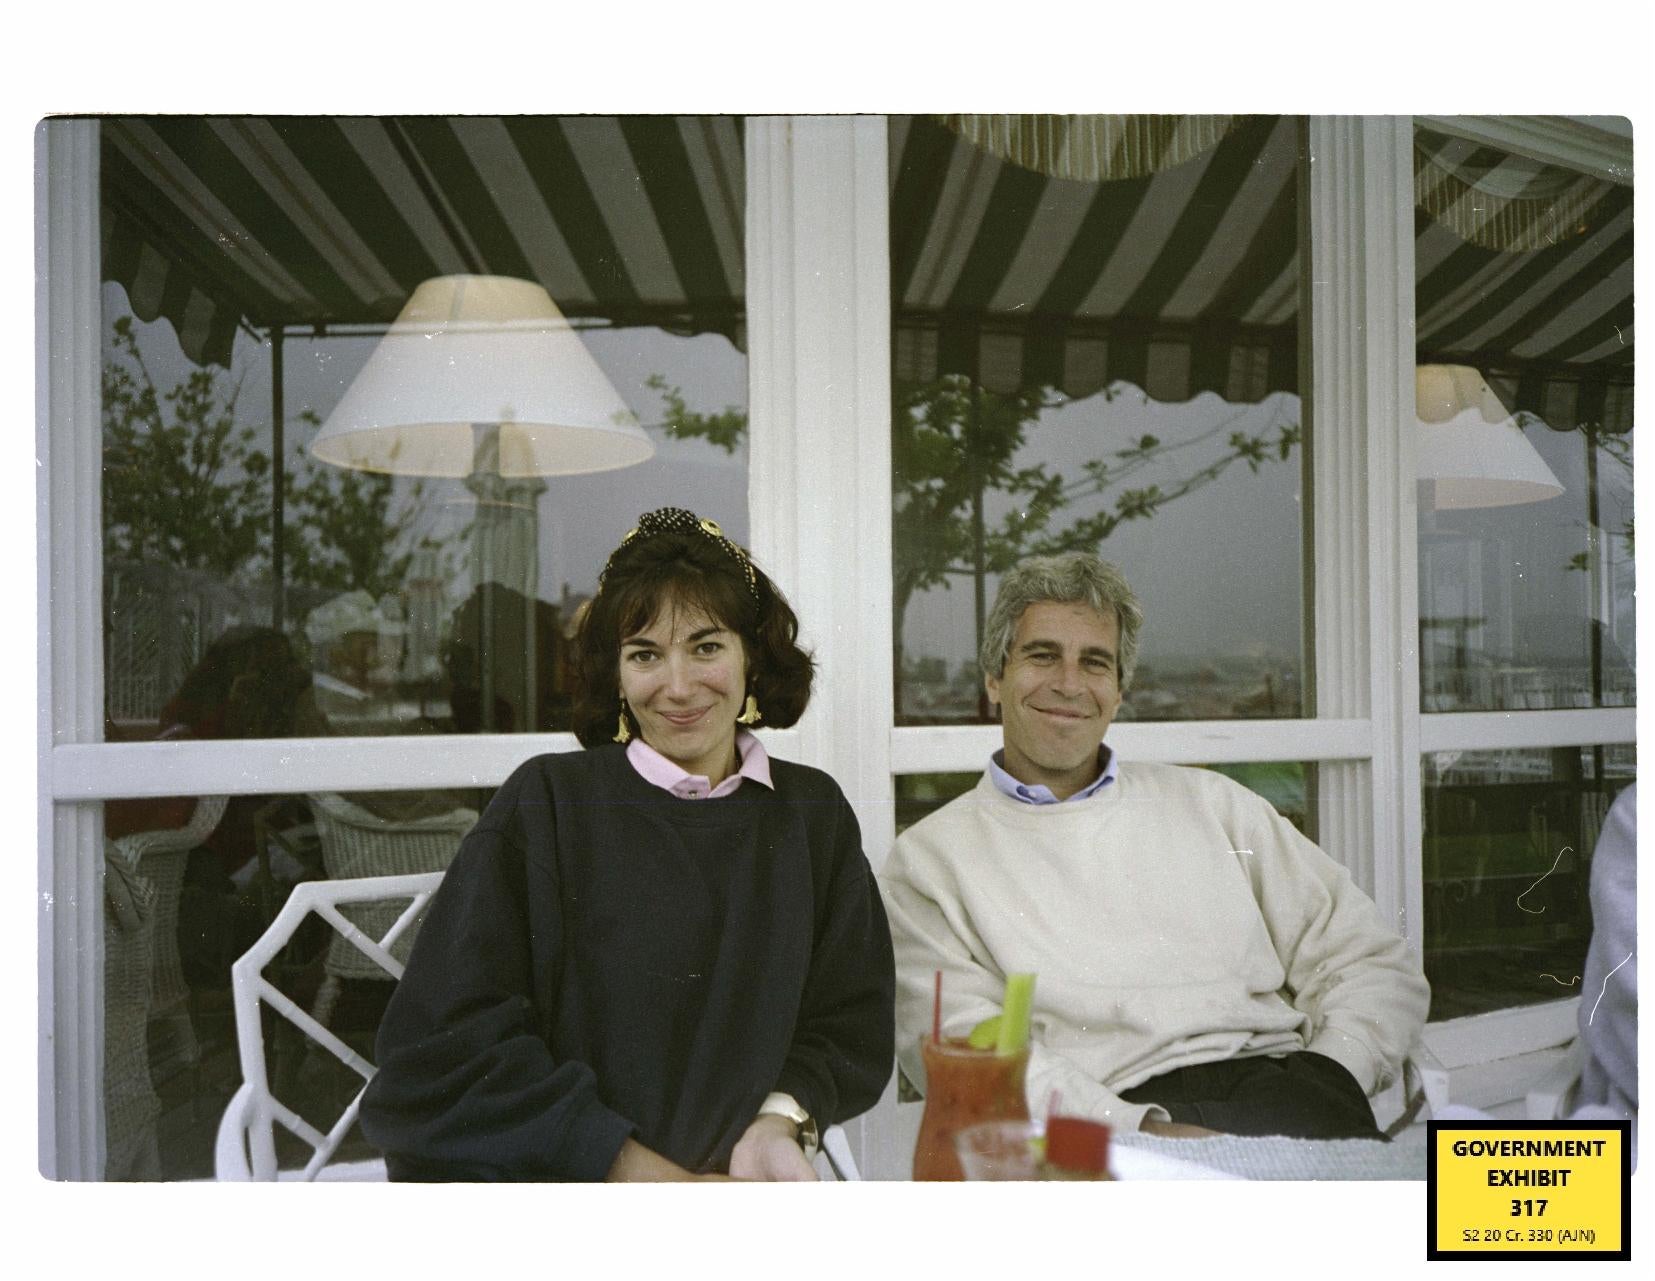 Ghislaine Maxwell with Jeffrey Epstein in a photo taken at the British royal family’s estate at Balmoral in the 1990s